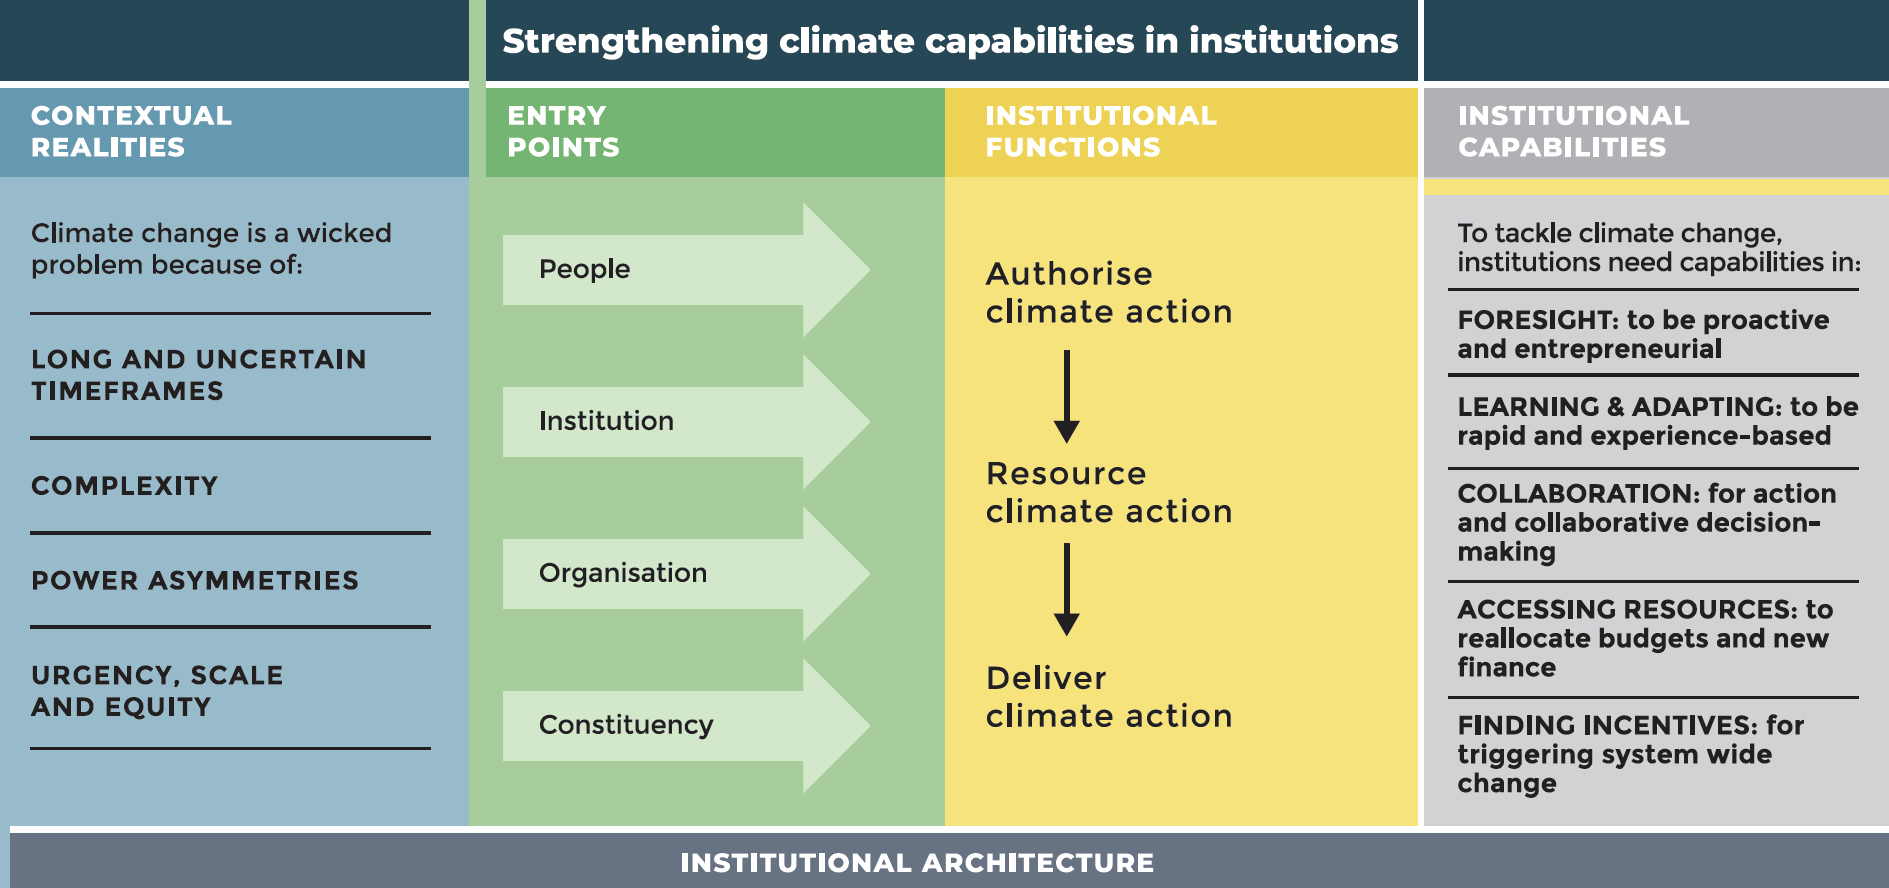 Strengthening institutional climate capabilities